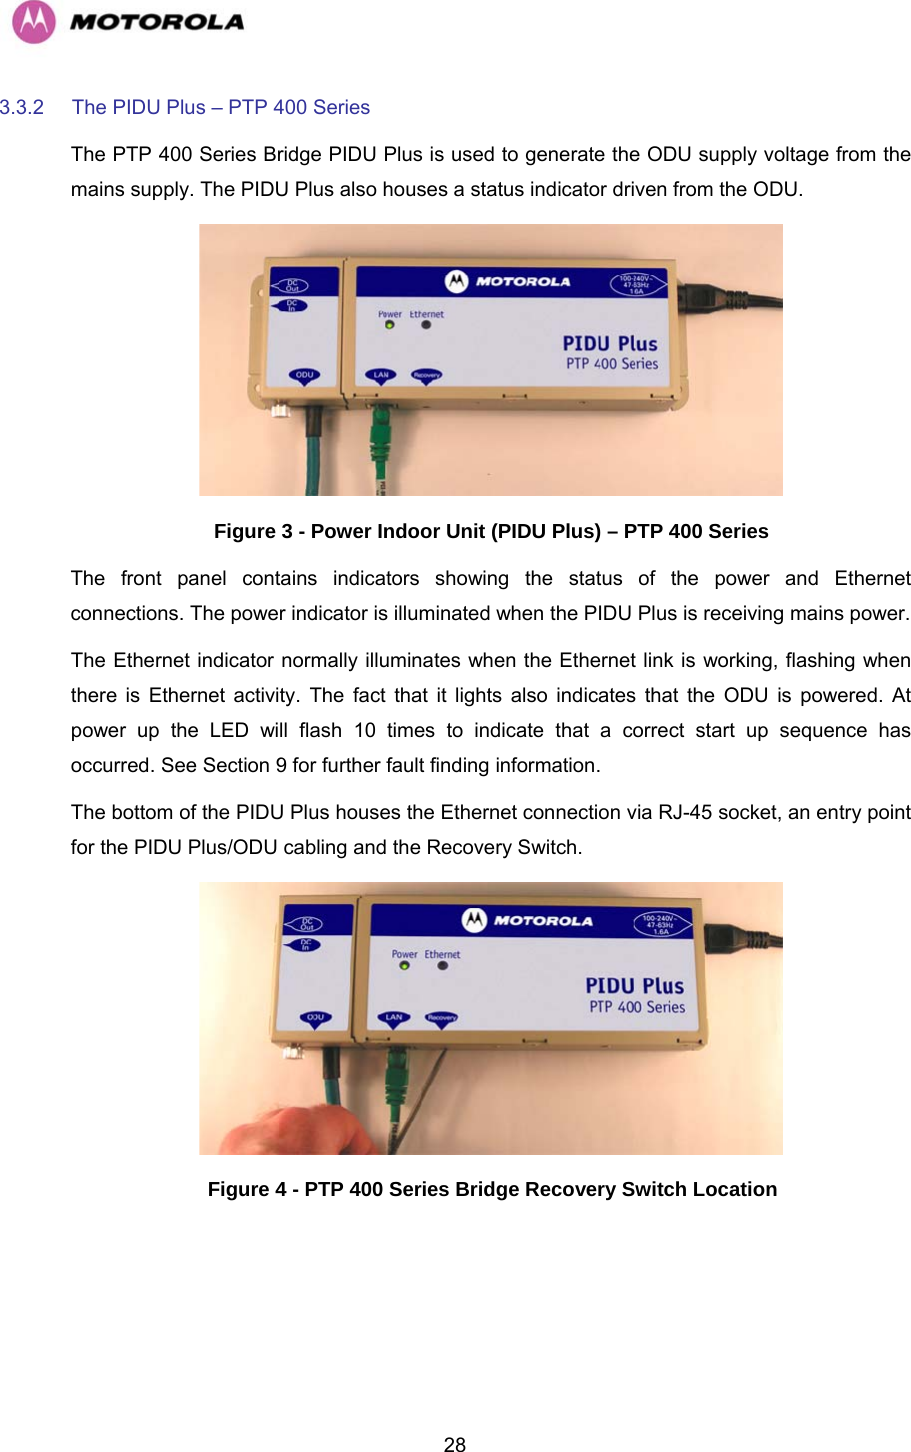   283.3.2  The PIDU Plus – PTP 400 Series The PTP 400 Series Bridge PIDU Plus is used to generate the ODU supply voltage from the mains supply. The PIDU Plus also houses a status indicator driven from the ODU.  Figure 3 - Power Indoor Unit (PIDU Plus) – PTP 400 Series The front panel contains indicators showing the status of the power and Ethernet connections. The power indicator is illuminated when the PIDU Plus is receiving mains power. The Ethernet indicator normally illuminates when the Ethernet link is working, flashing when there is Ethernet activity. The fact that it lights also indicates that the ODU is powered. At power up the LED will flash 10 times to indicate that a correct start up sequence has occurred. See Section 9 for further fault finding information.  The bottom of the PIDU Plus houses the Ethernet connection via RJ-45 socket, an entry point for the PIDU Plus/ODU cabling and the Recovery Switch.  Figure 4 - PTP 400 Series Bridge Recovery Switch Location 